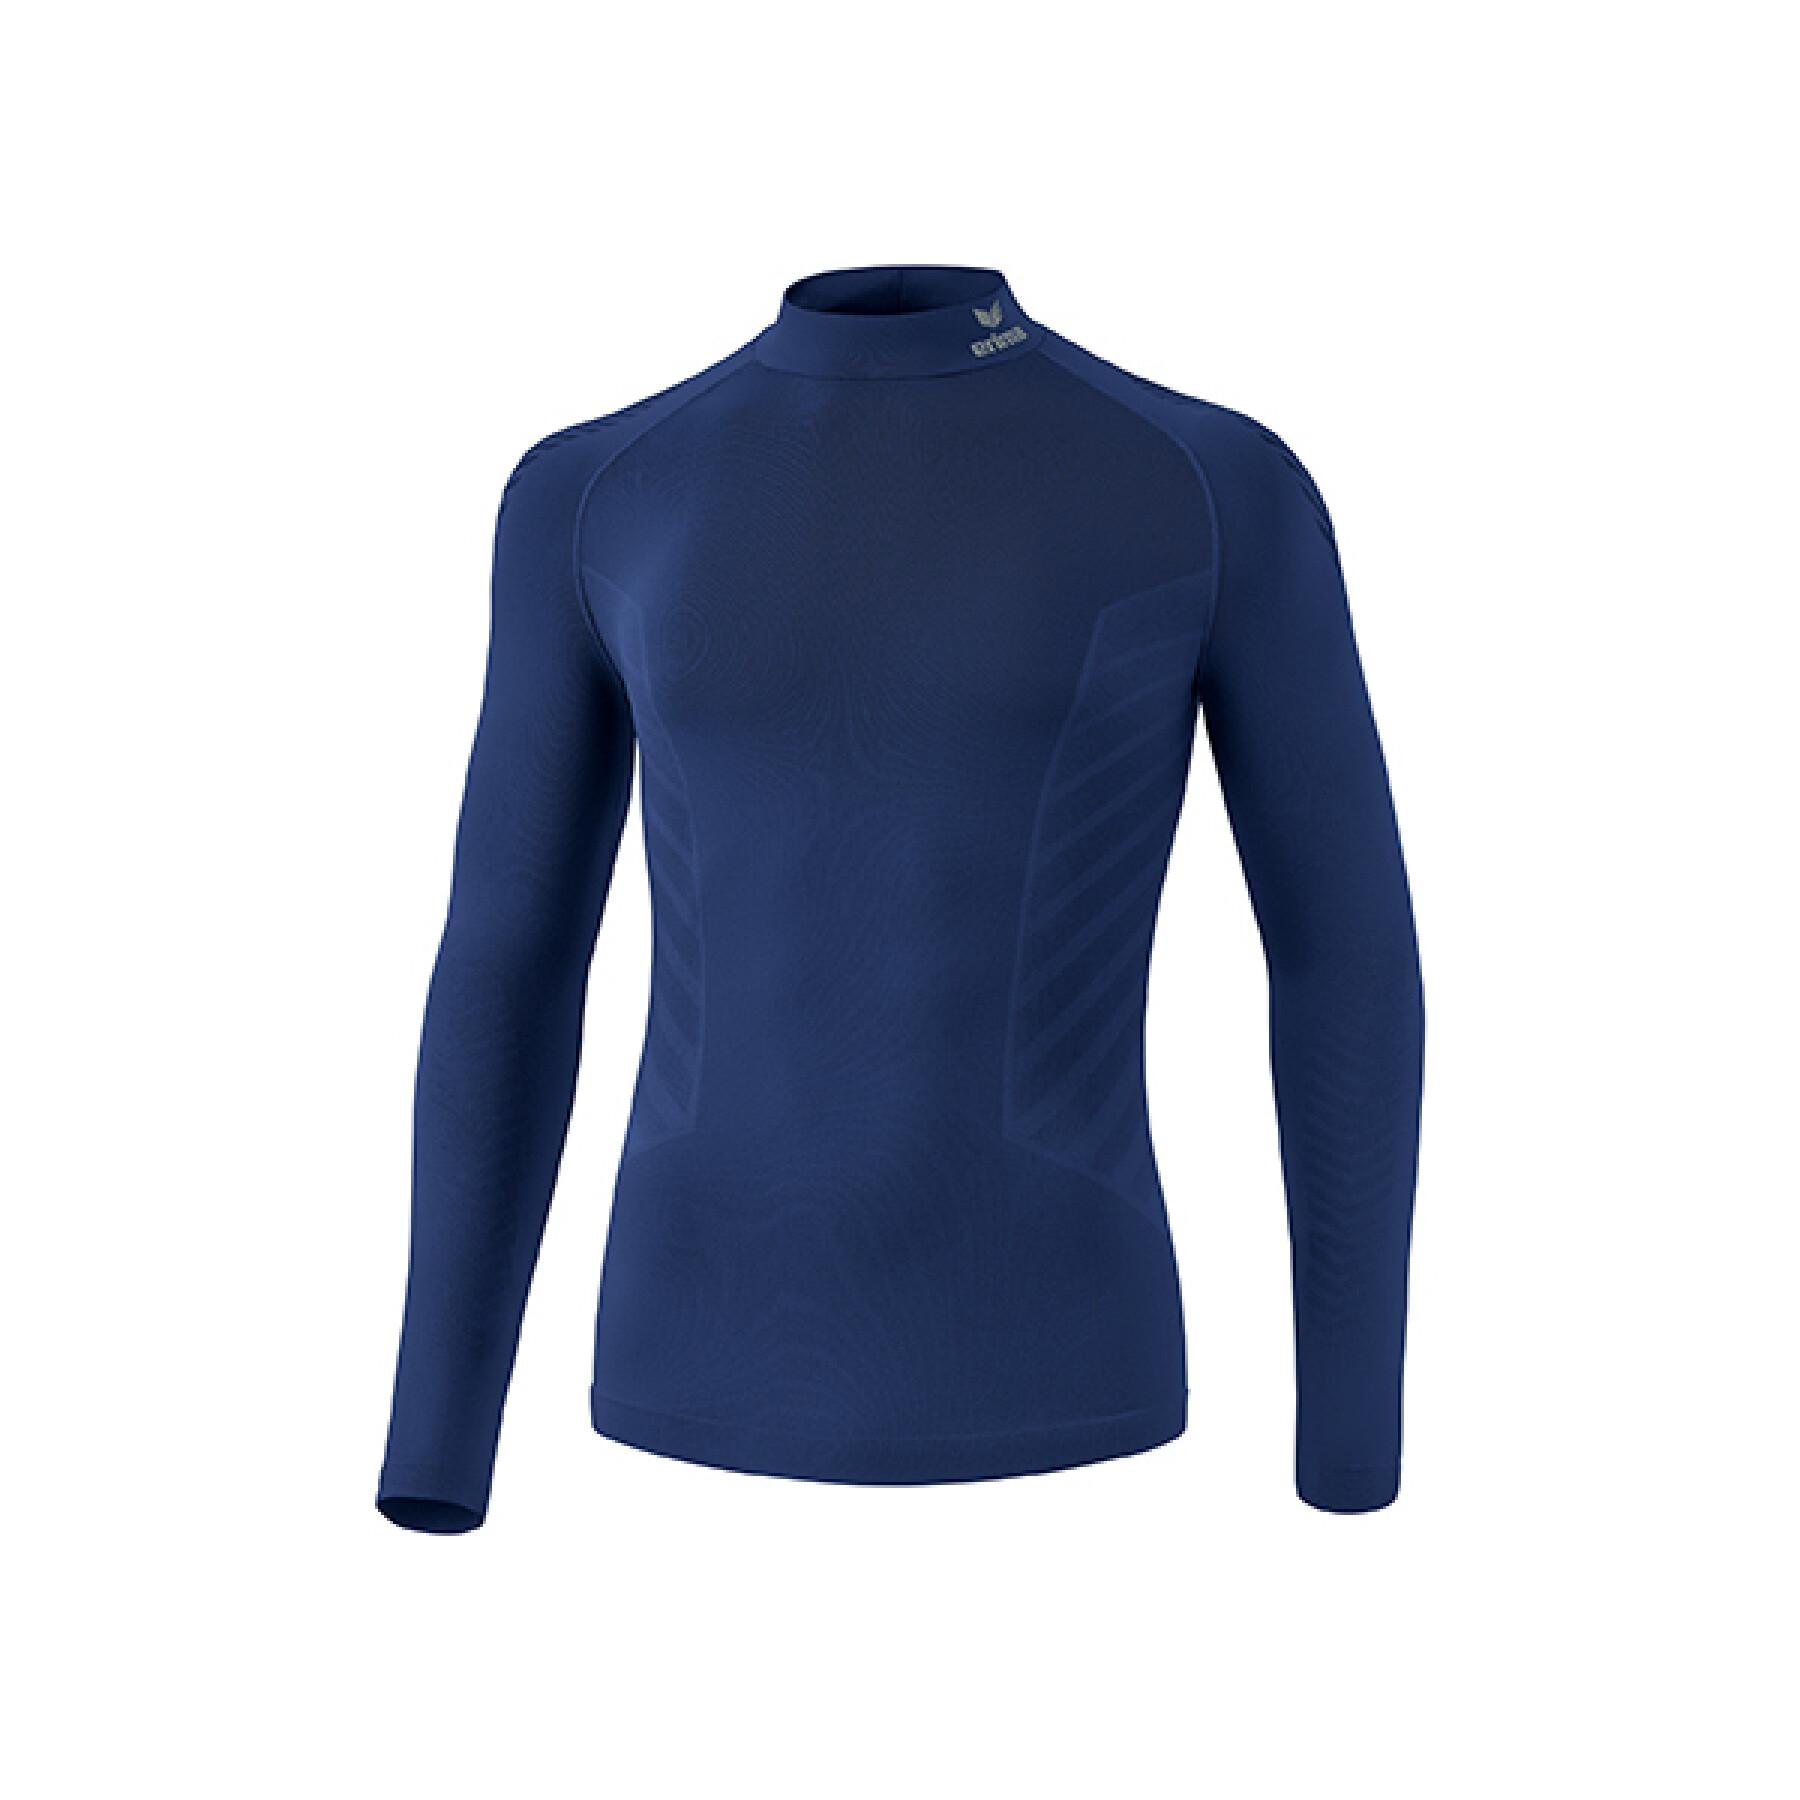 Long sleeve compression jersey with high neck Erima Athletic - Erima -  Brands - Slocog wear